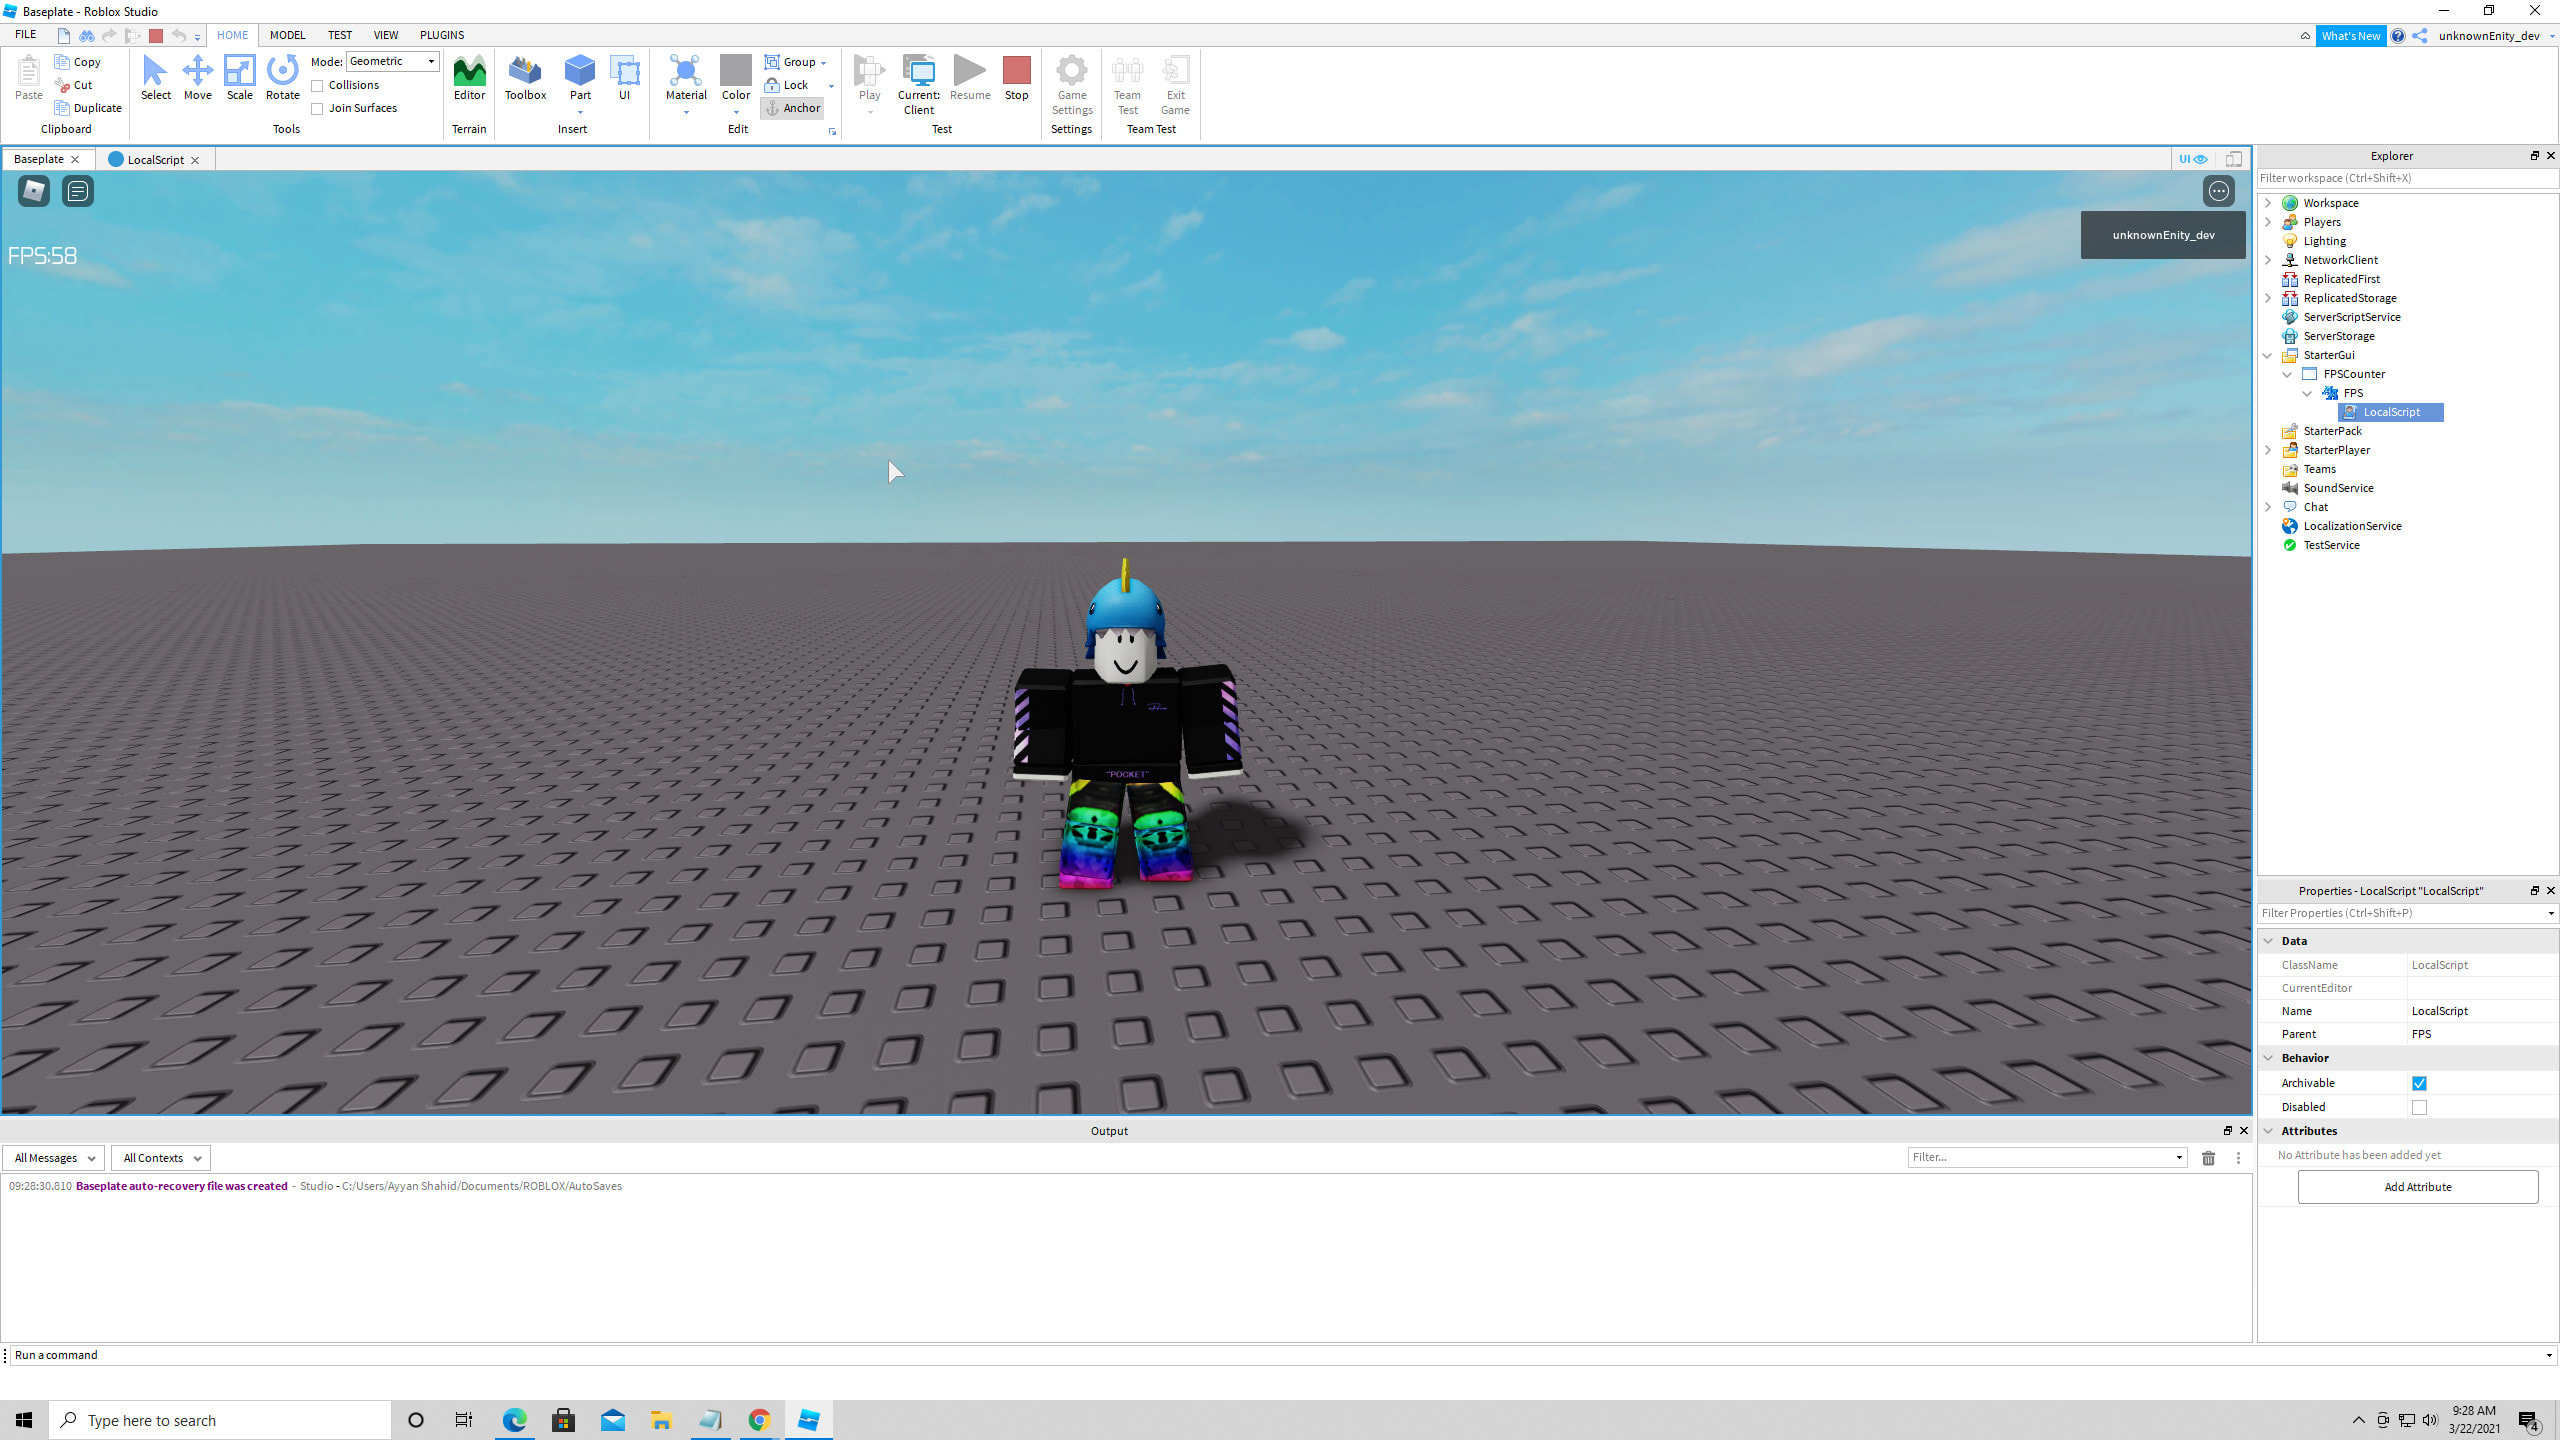 Make You A Fps Counter In Roblox Studio By Devyaimbot Fiverr - in roblox studio